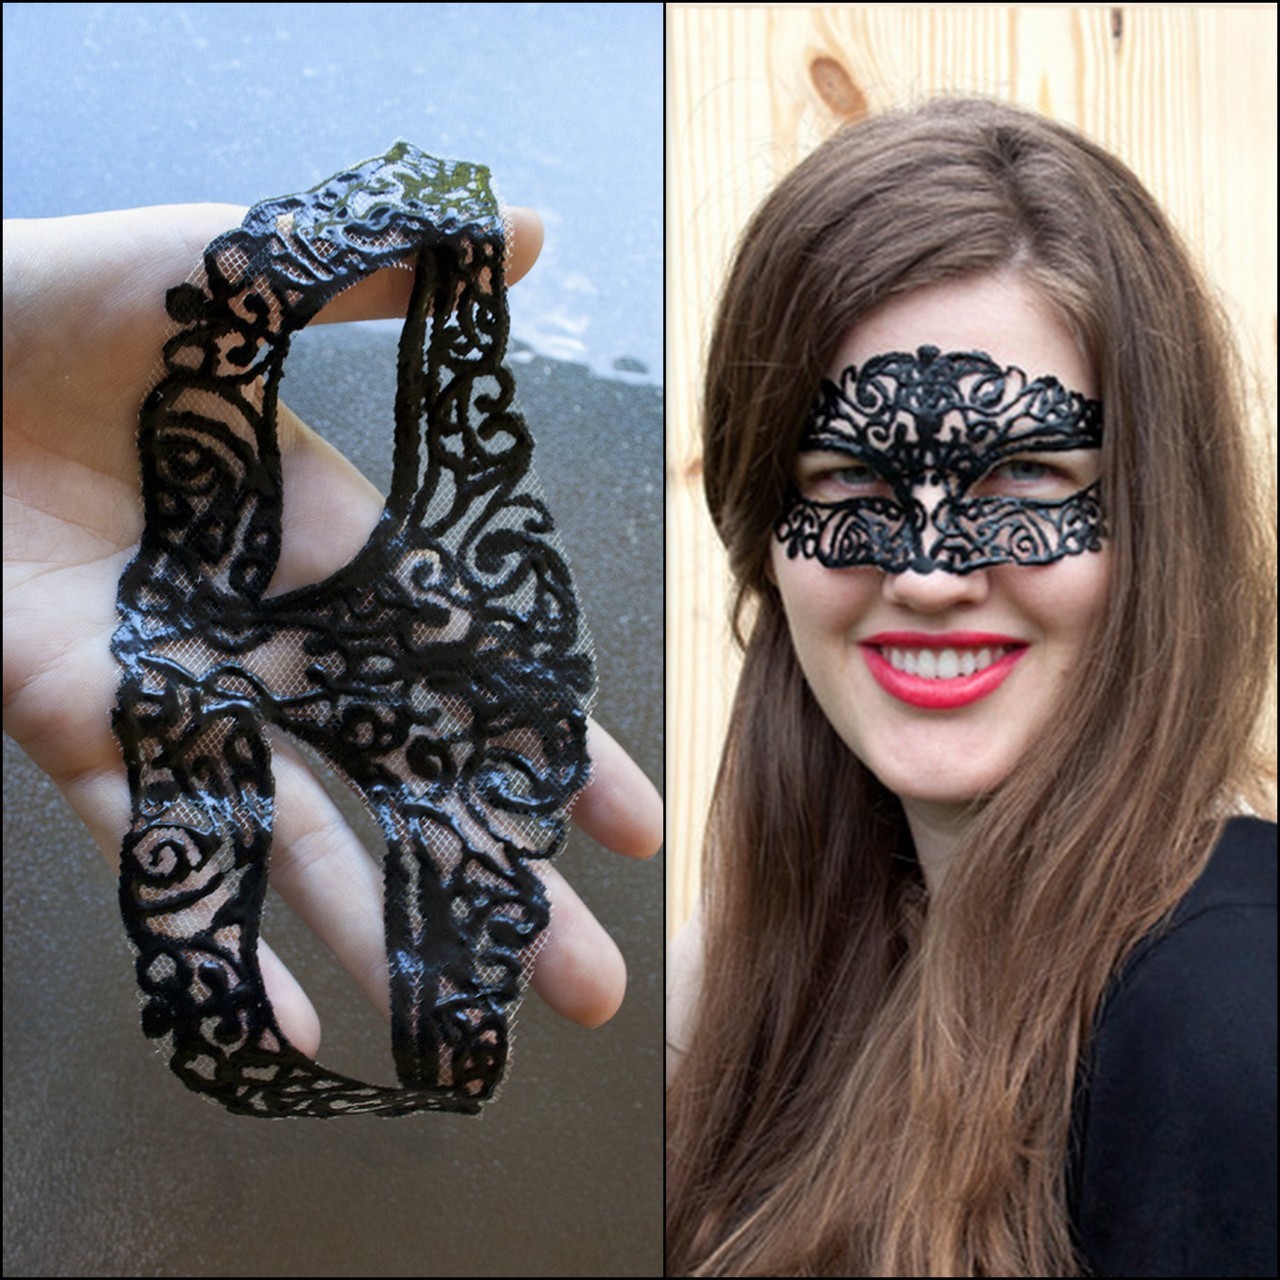 DIY Masquerade Mask Tutorial and Template from Sprinkles in SpringsI seriously cannot believe I did 